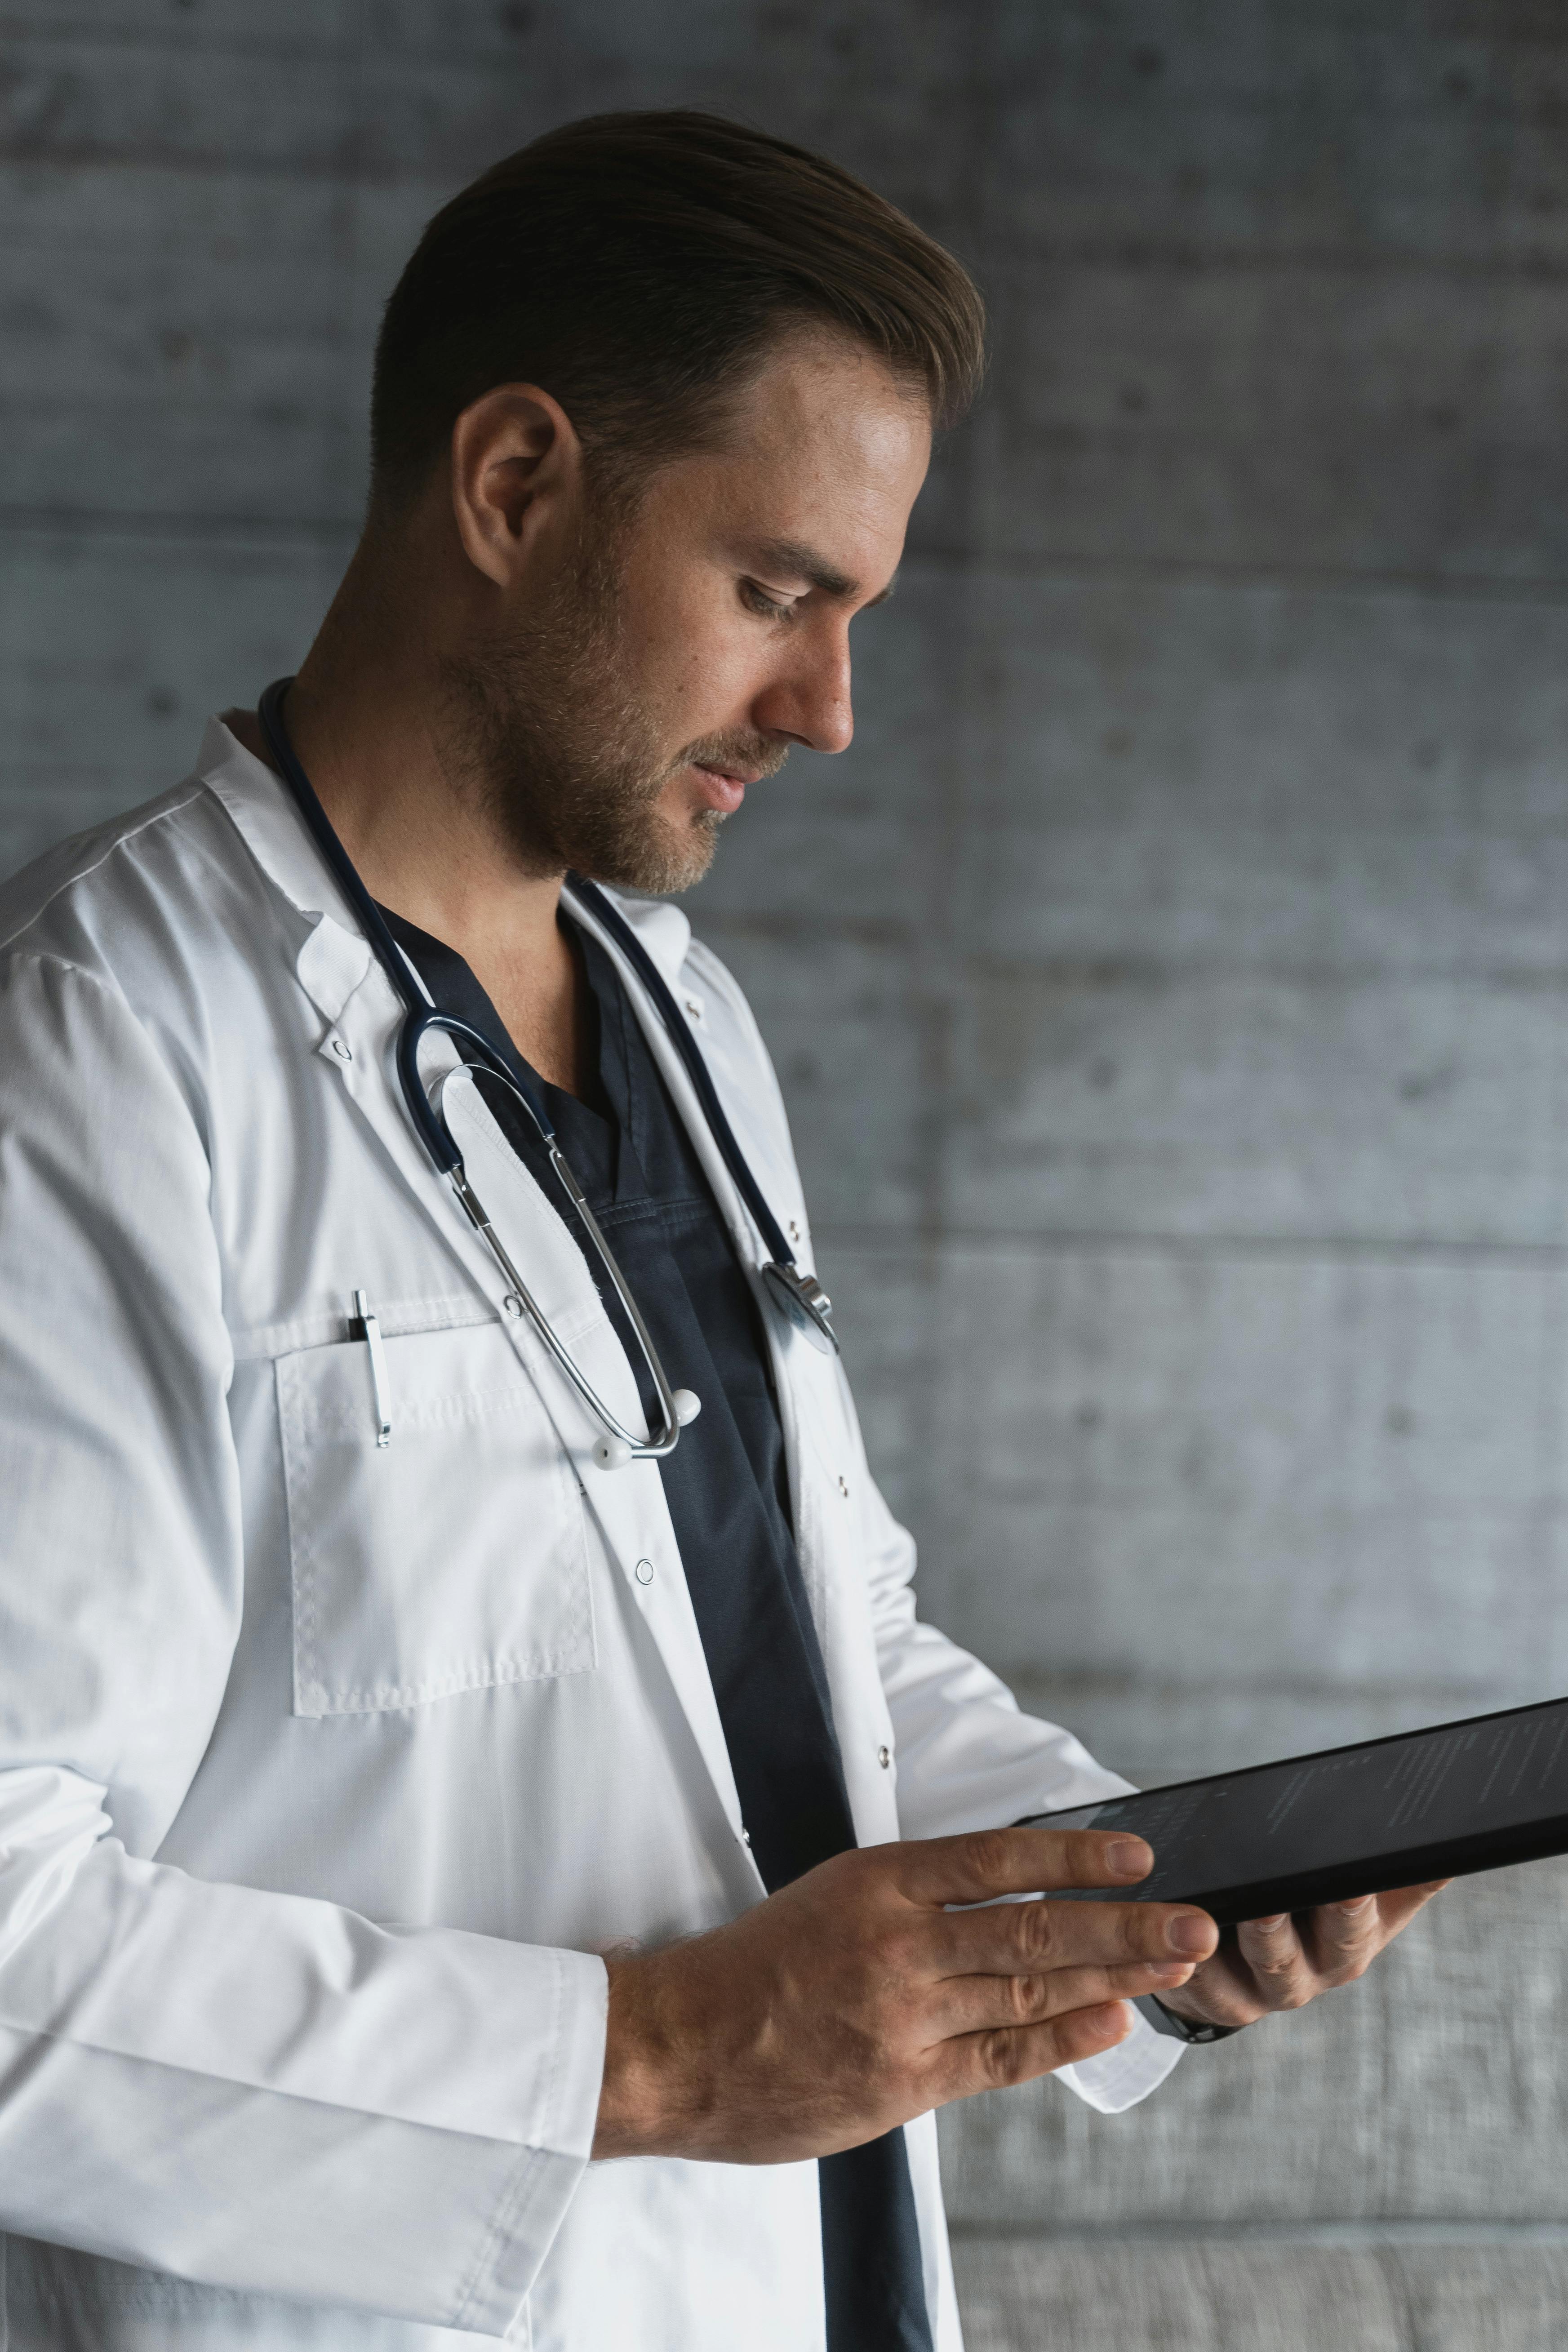 A doctor dress in a white coat while reading hospital documents | Source: Pexels